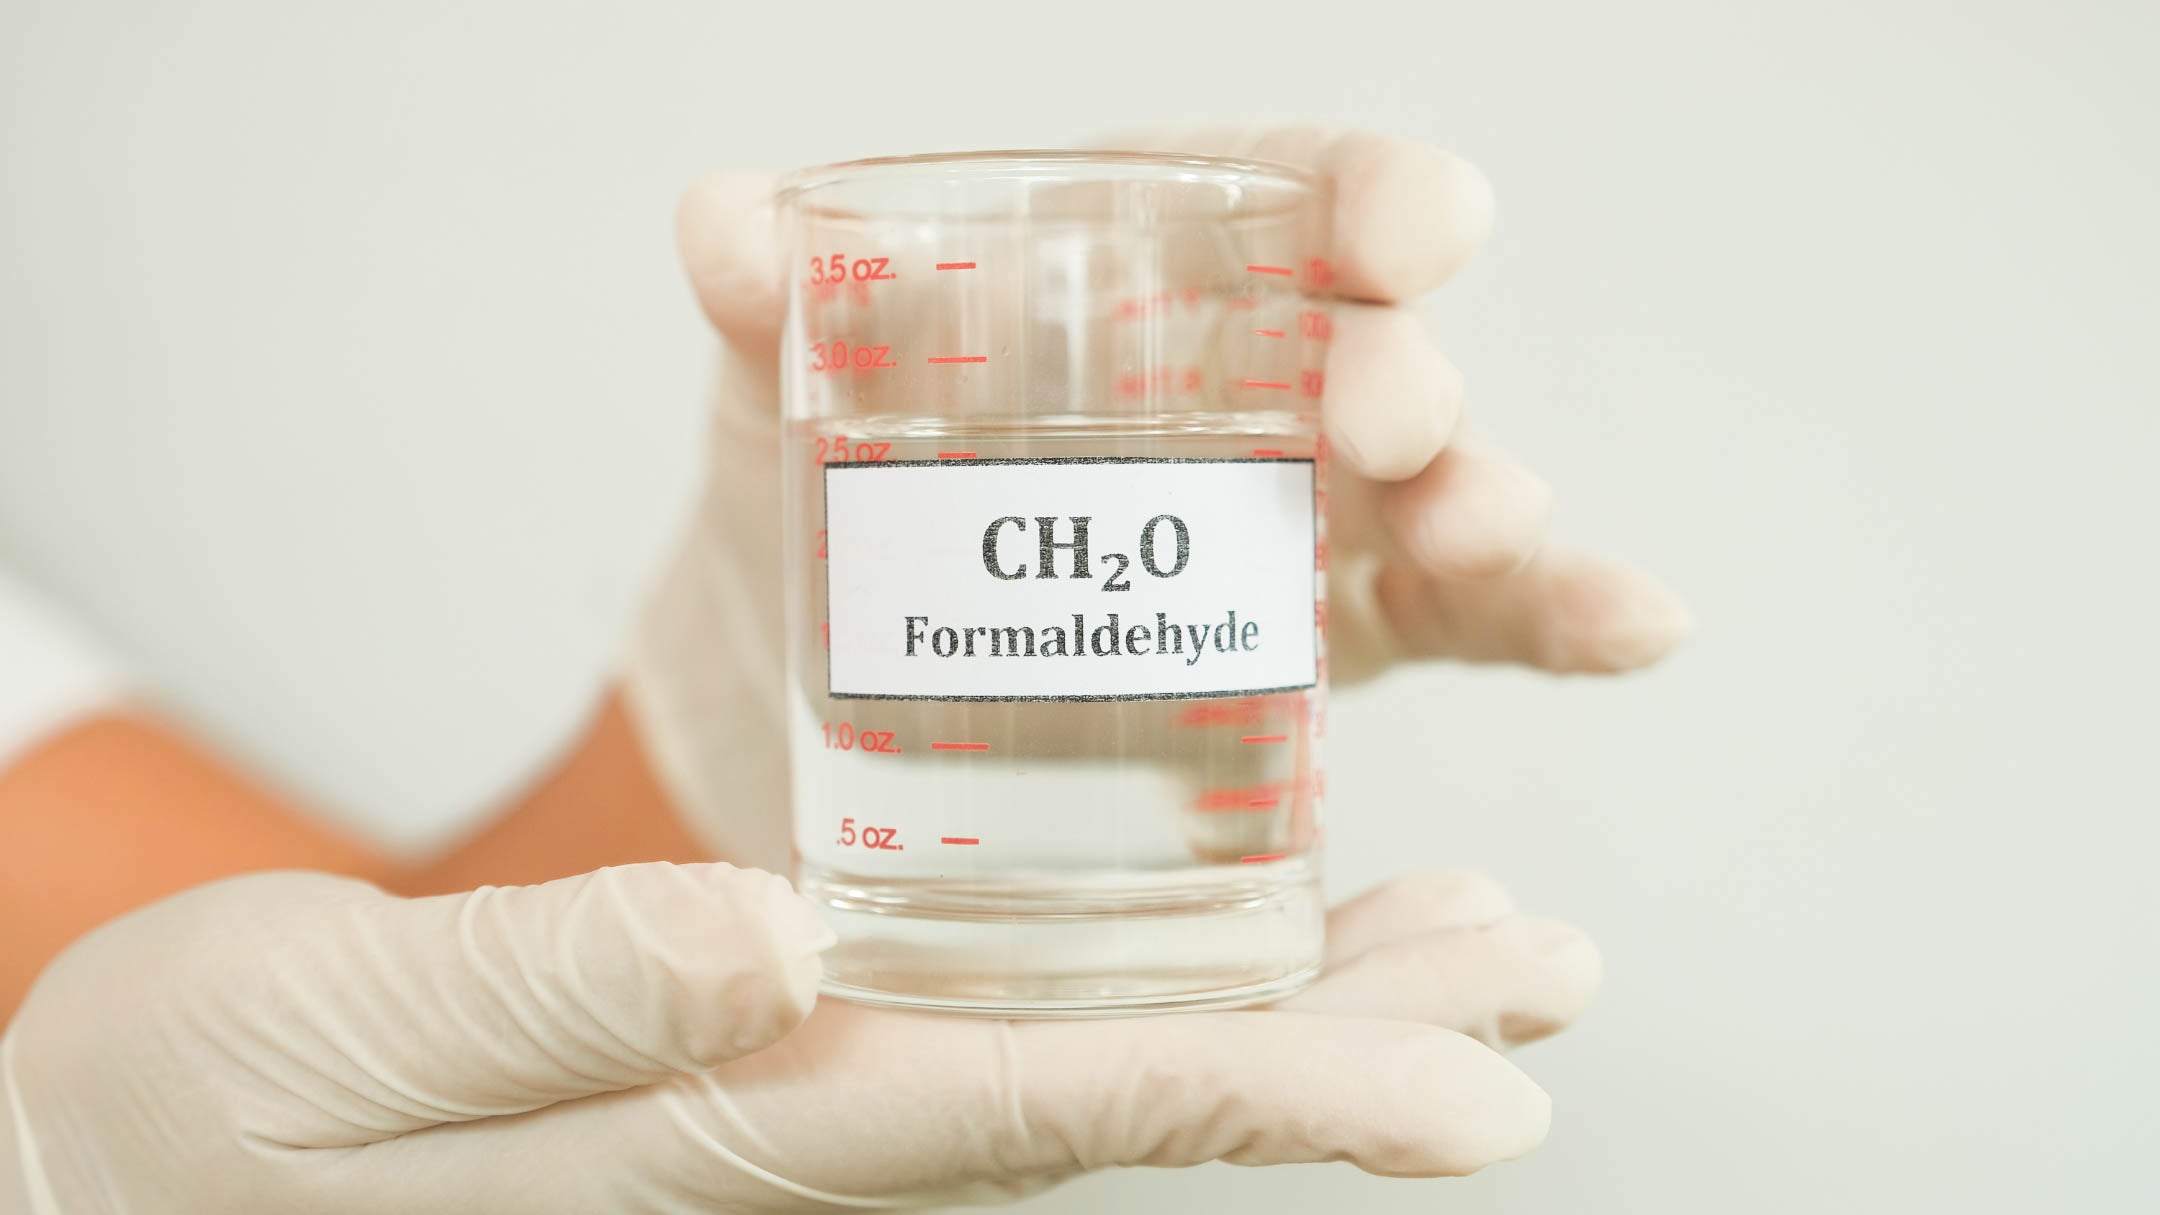 Formaldehyde chemical commonly found in some heavy duty cleansers.